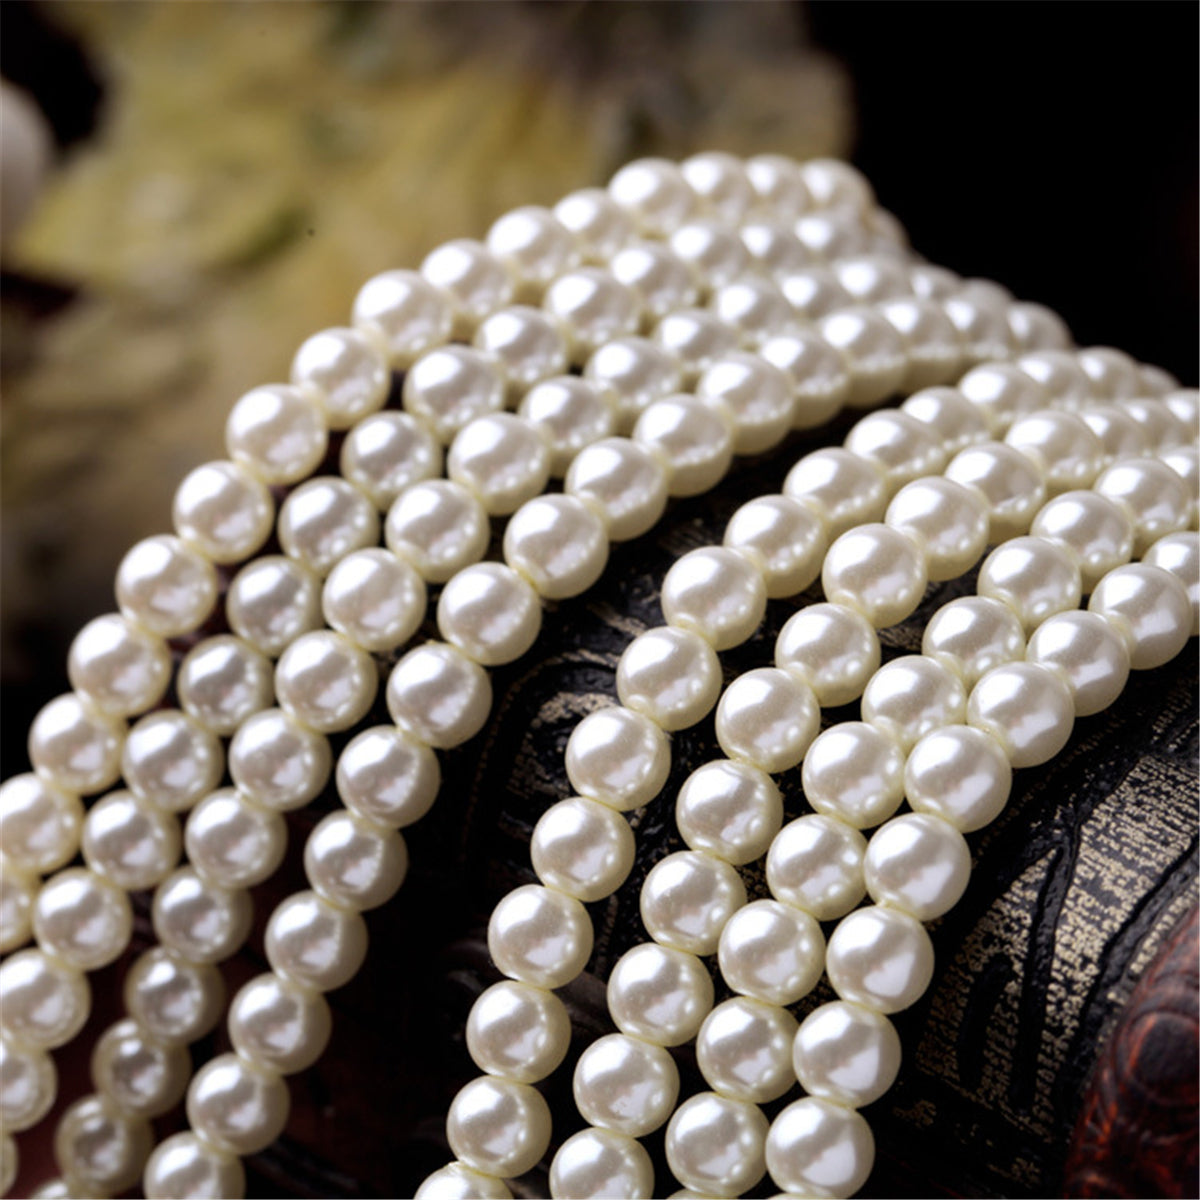 Pearl & Cubic Zirconia Layered Statement Necklace